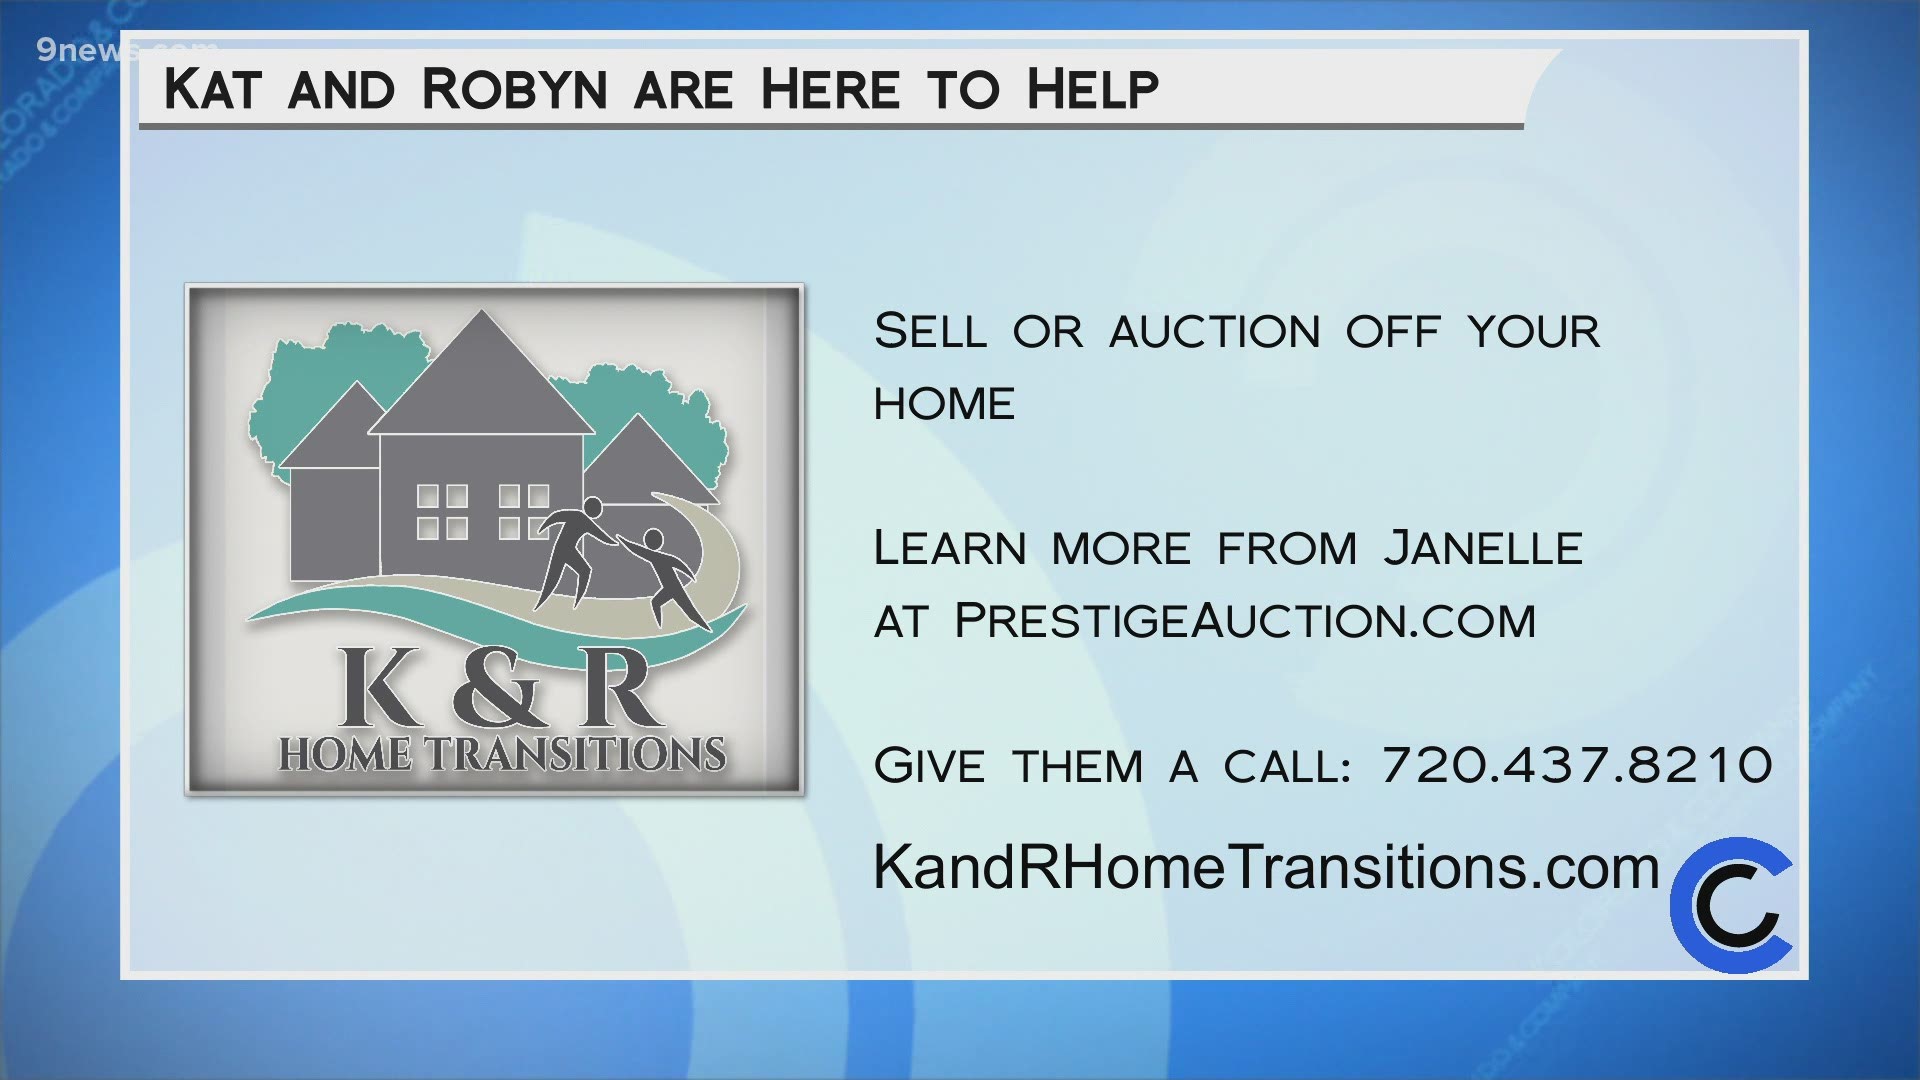 Learn about the resources available to you at KAndRHomeTransitions.com or call 720.437.8210. You can learn about the auction process at PrestigeAuction.com.